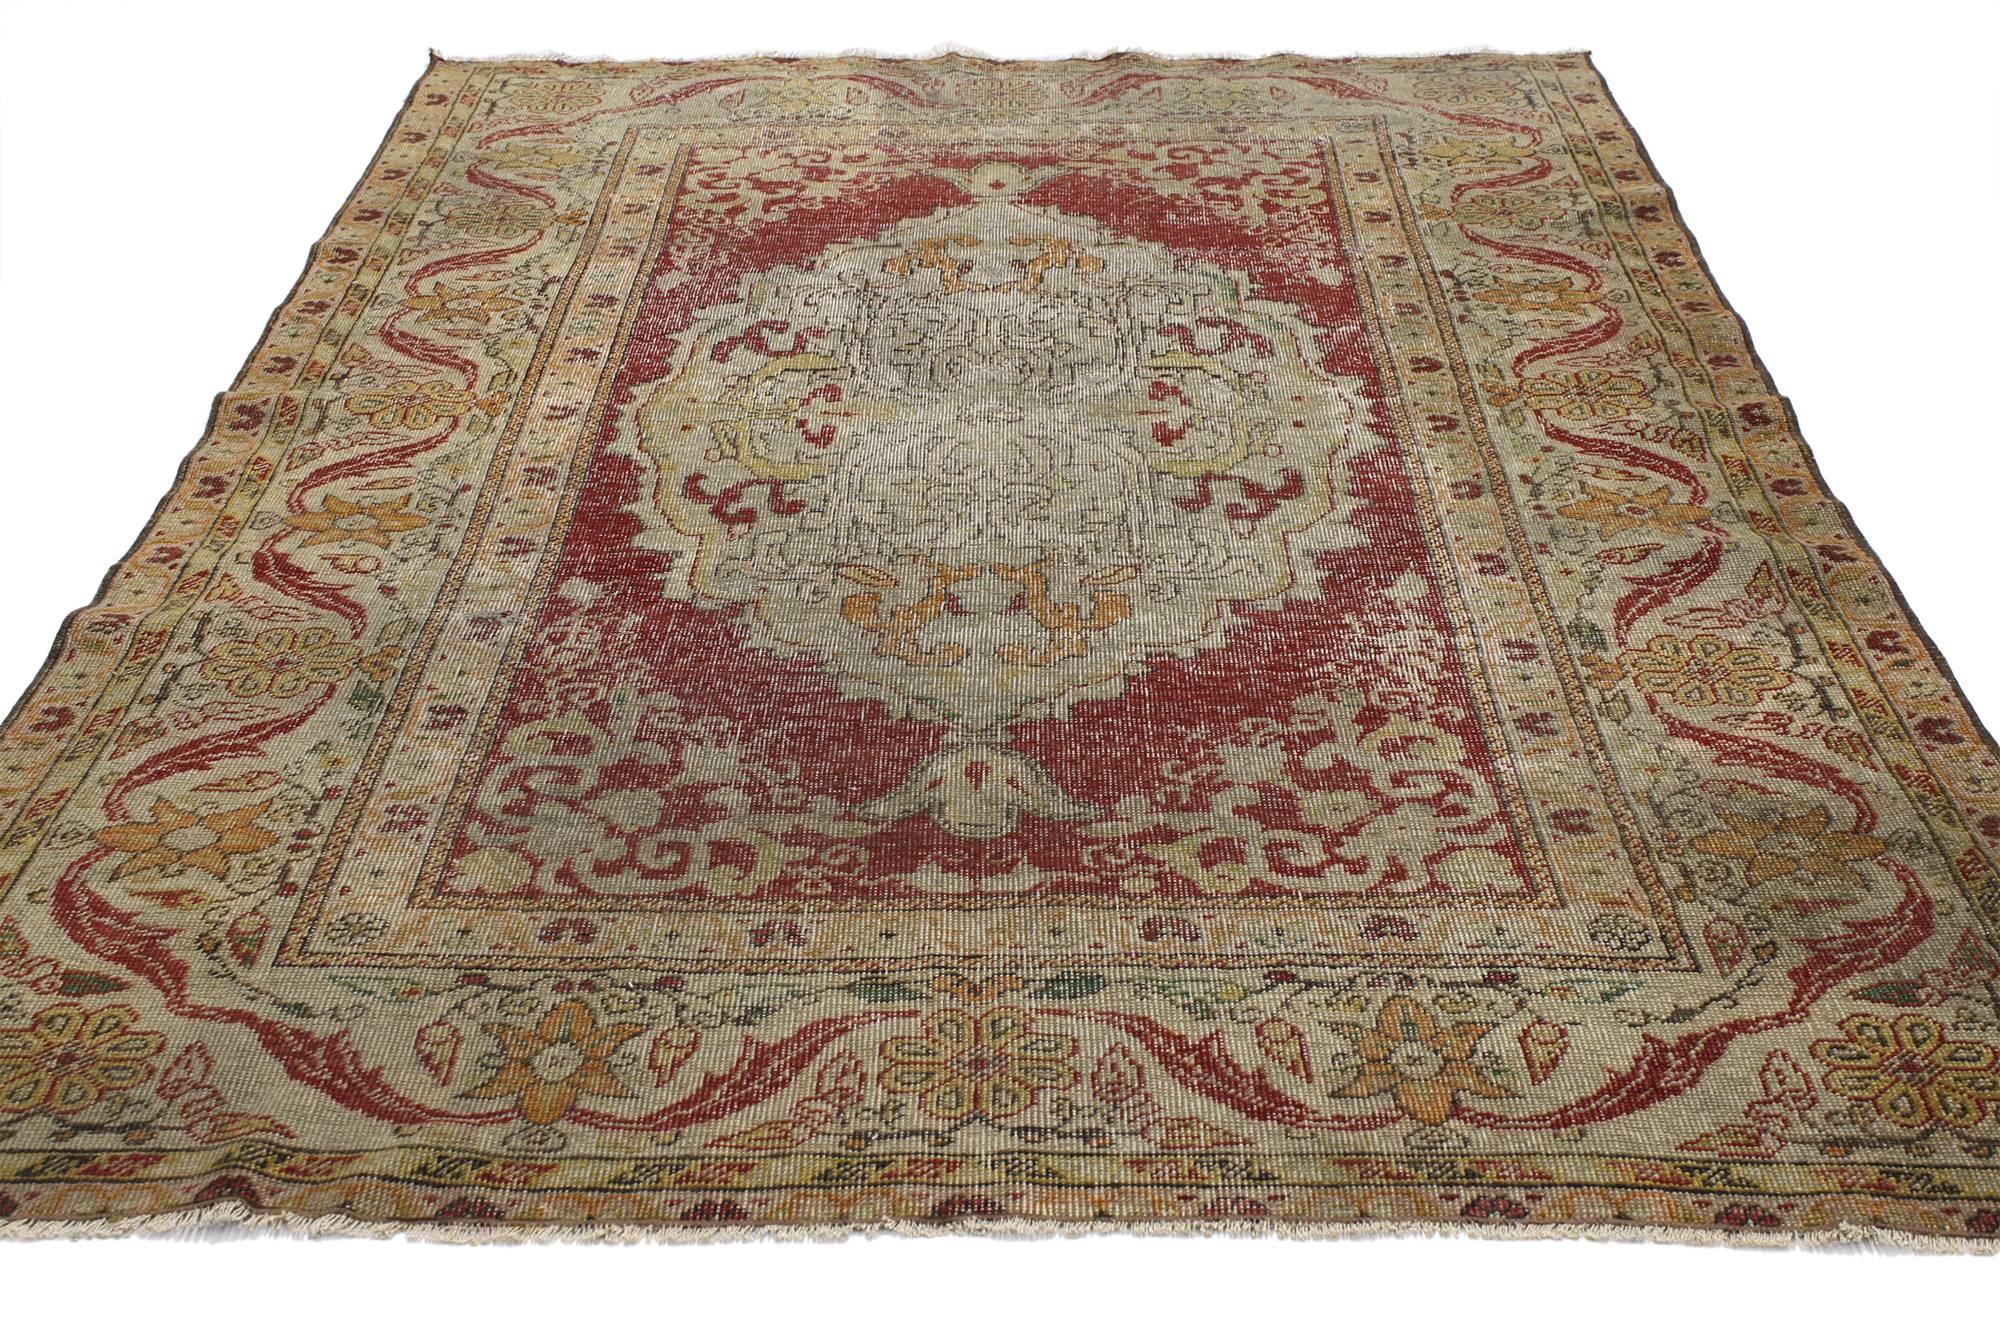 52081 Vintage Turkish Oushak Rug, 04'02 x 06'01.
Balancing traditional design elements with rustic sensibility and nostalgic charm, this hand knotted wool distressed vintage Turkish Oushak rug can beautifully blend modern, traditional, rustic, and